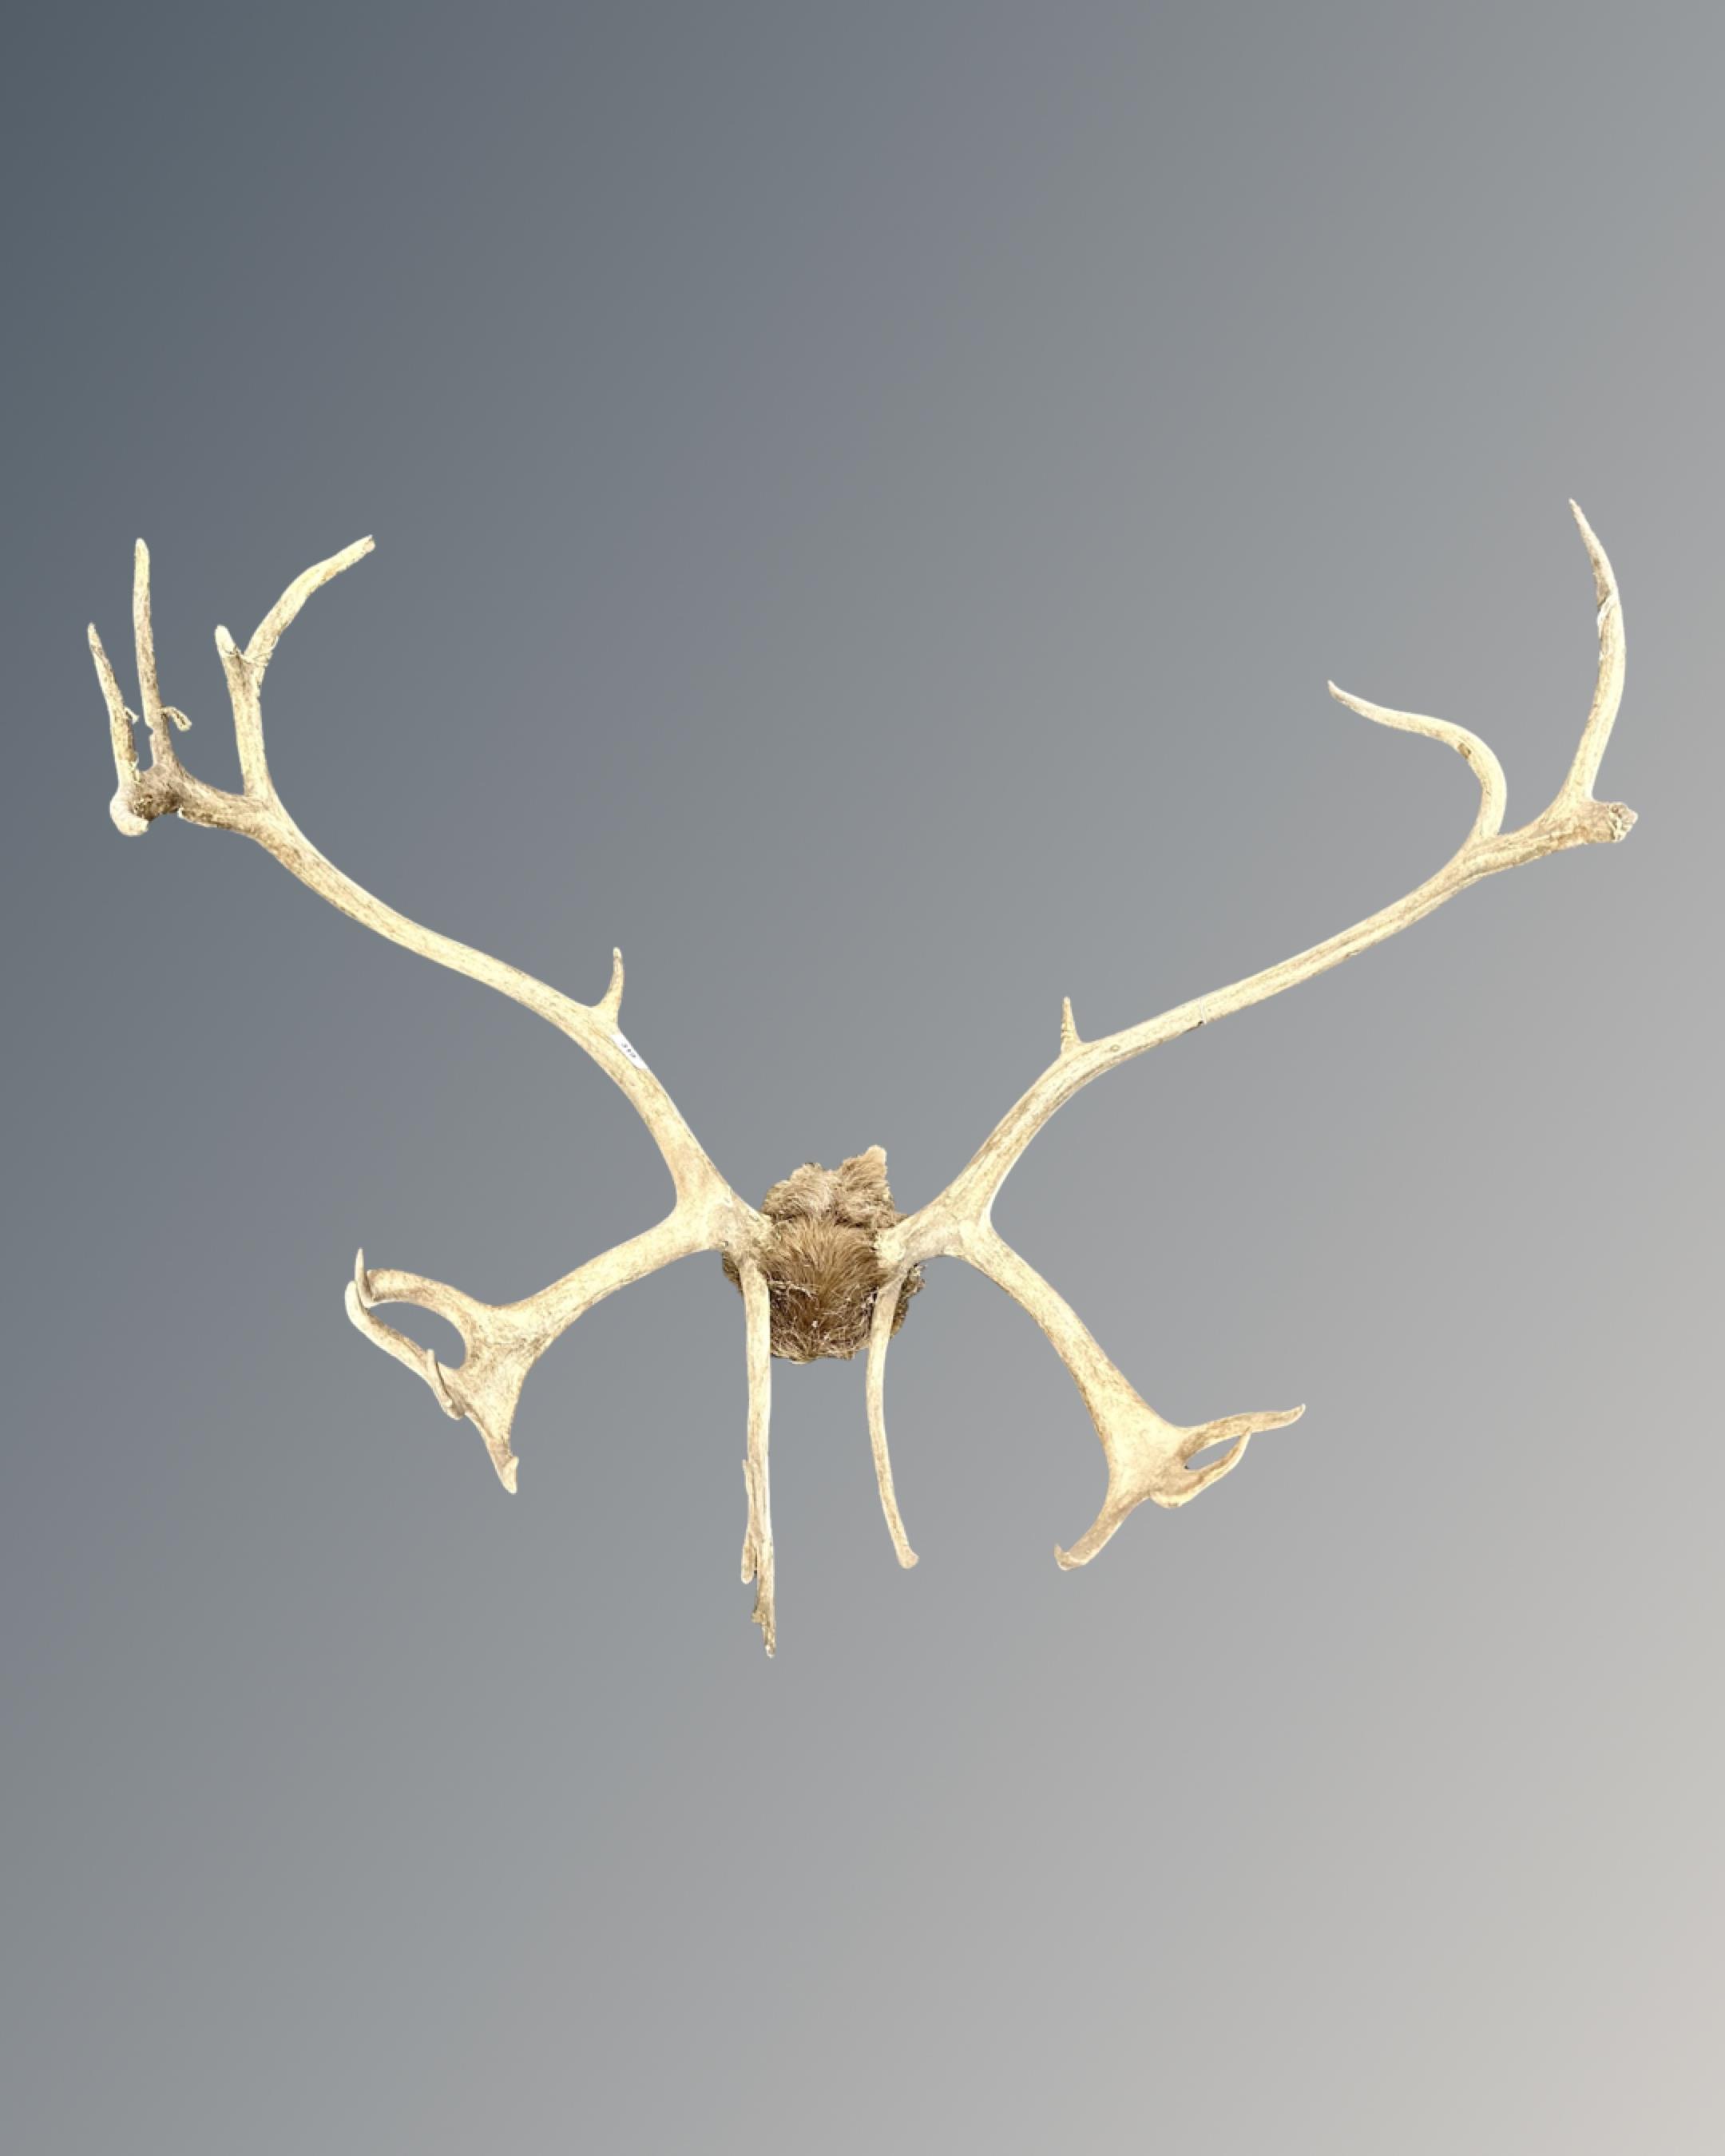 A set of antlers.